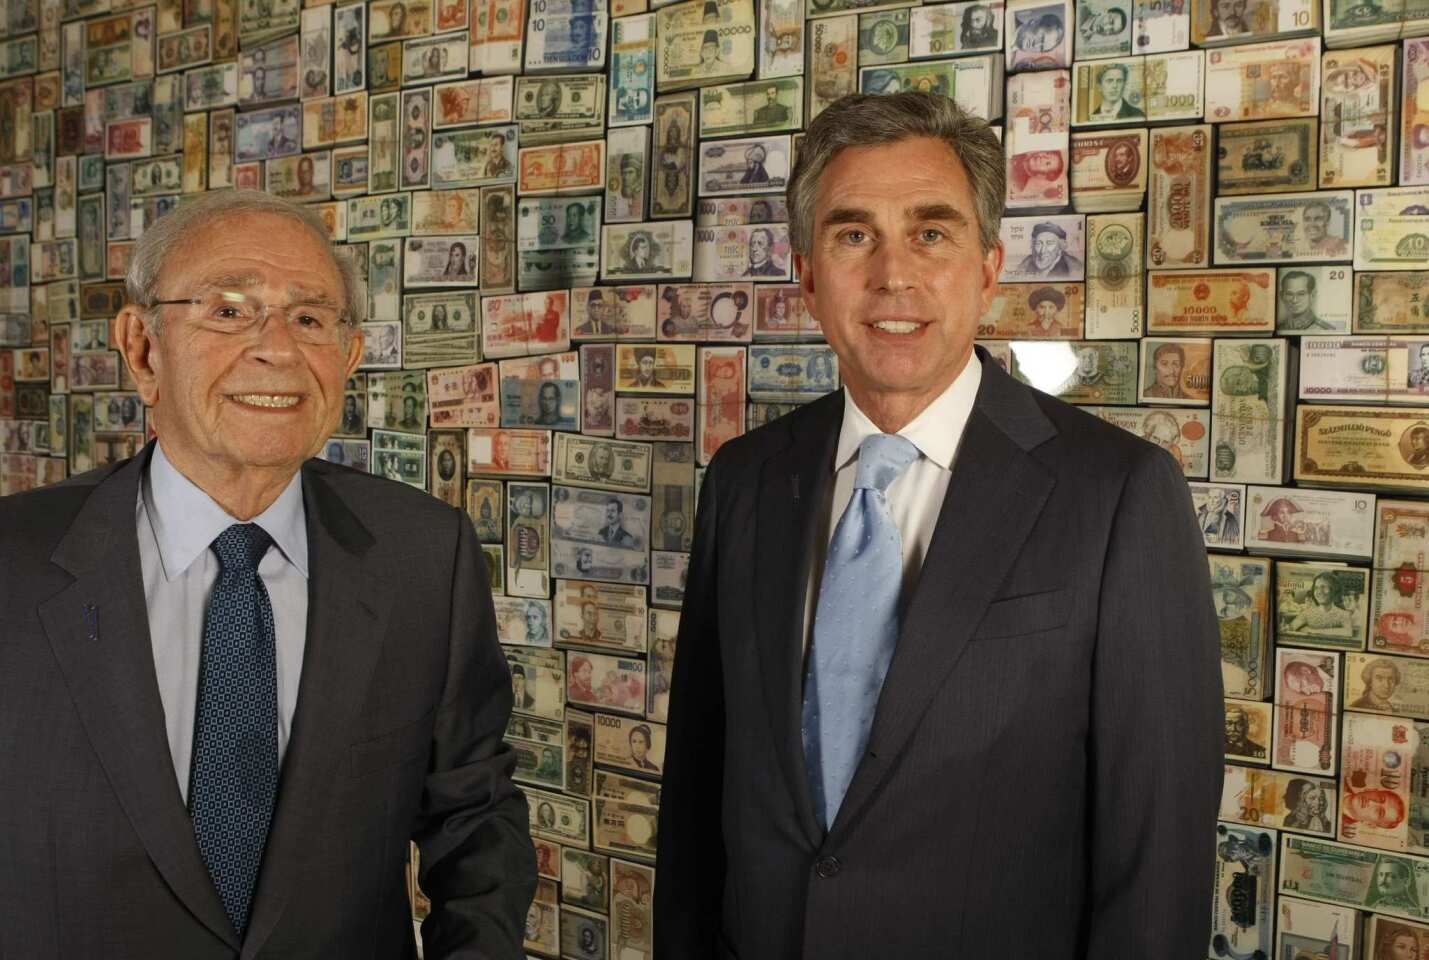 Bram Goldsmith, left, has seen it all at City National Bank. Son-in-law of a founder, he was a client in the 1950s, joined the board in 1964 and became chief executive in 1975. Son Russell Goldsmith, right, became CEO in 1995.